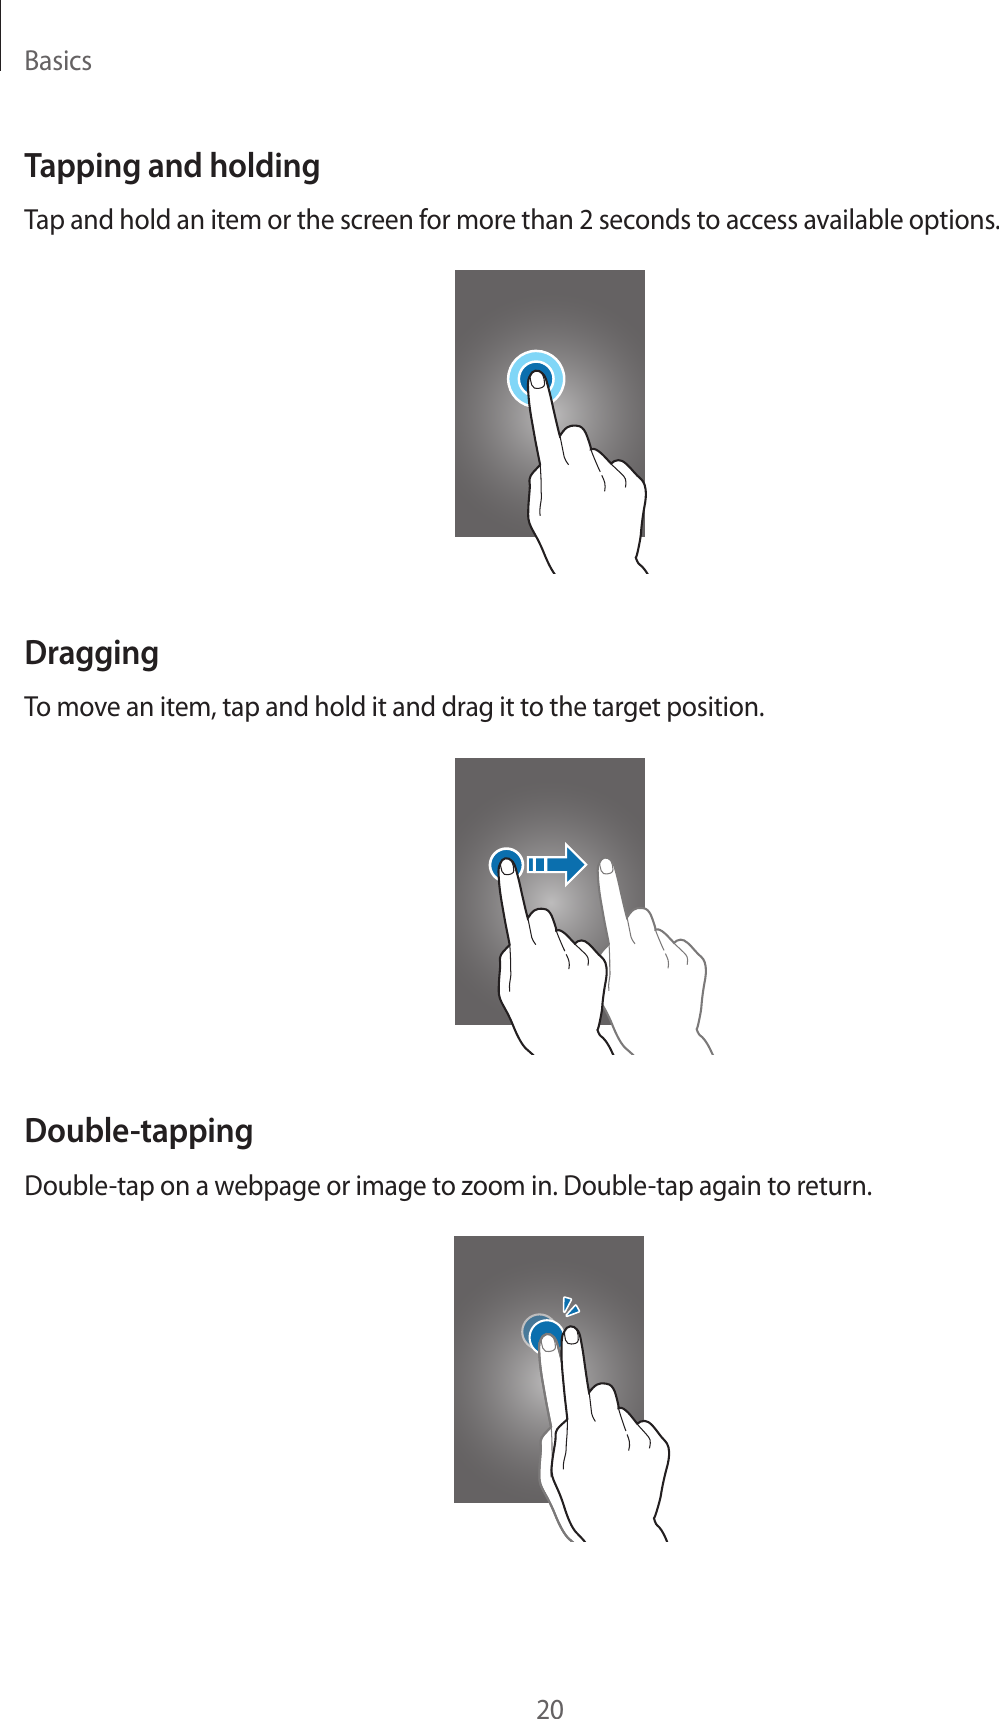 Basics20Tapping and holdingTap and hold an item or the screen for more than 2 seconds to access available options.DraggingTo move an item, tap and hold it and drag it to the target position.Double-tappingDouble-tap on a webpage or image to zoom in. Double-tap again to return.